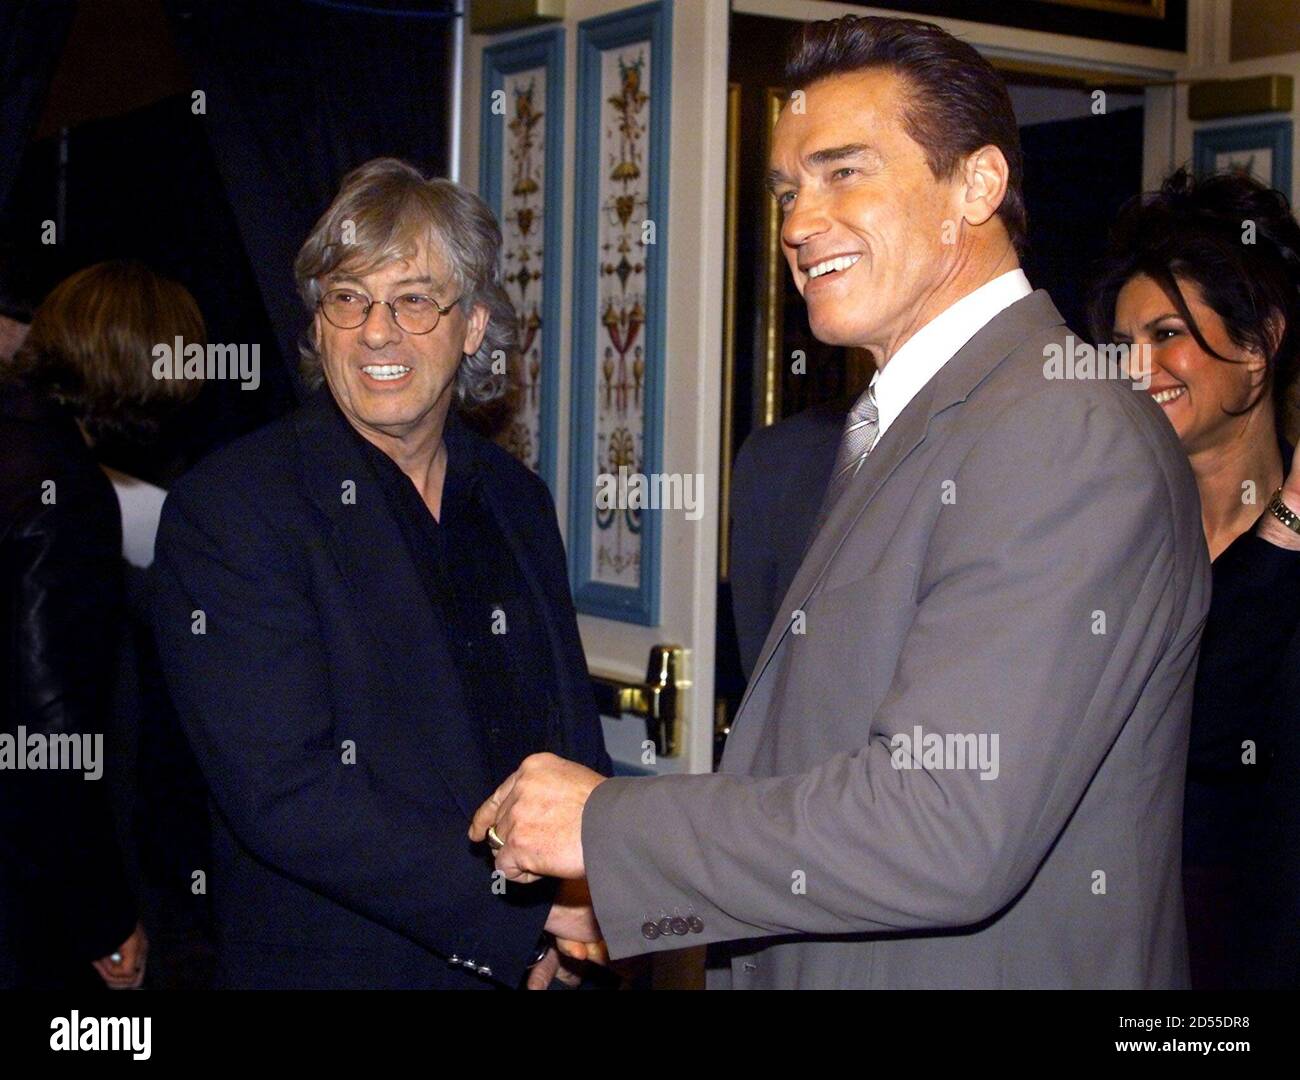 Director Paul Verhoeven greets Arnold Schwarzenegger (R) at a Columbia Pictures luncheon during the ShoWest convention March 8 in Las Vegas. [Verhoven is promoting his new film 'Hollow Man' about a scientist (Kevin Bacon)who discovers an invisibility formula. Schwarzenegger stars in 'The Sixth Day', a science fiction action film about human cloning that is scheduled to be released this fall. ] ShoWest is an annual convention and trade show for movie theater owners. Stock Photo